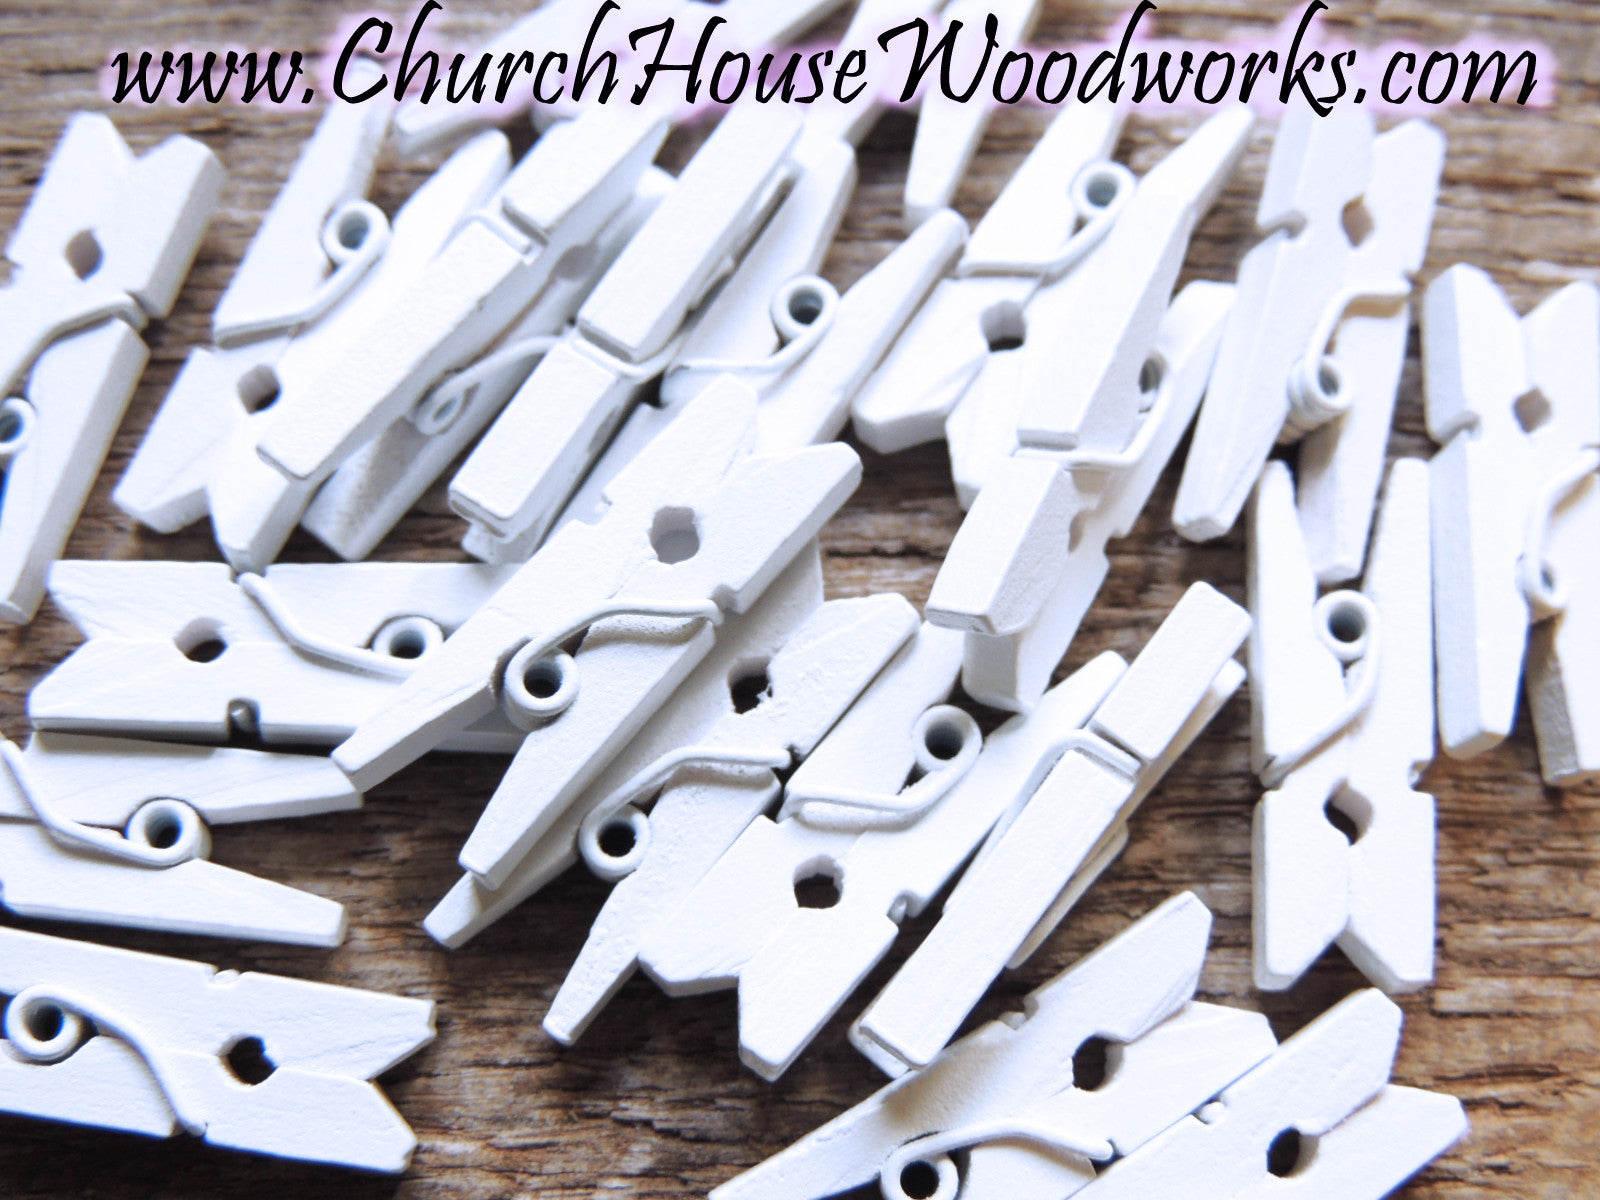 Pack of 100 Mini Red Wooden Clothespins – Church House Woodworks